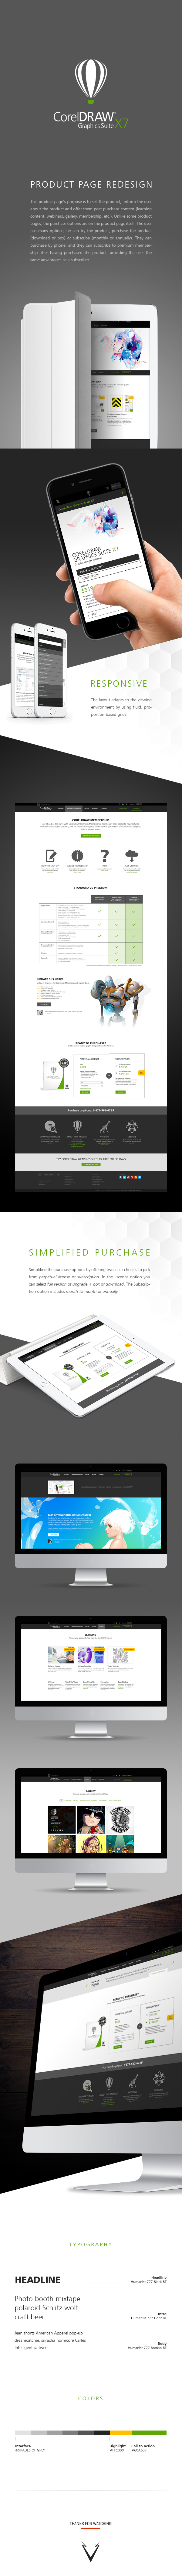 Webdesign UI Product Page Responsive ux